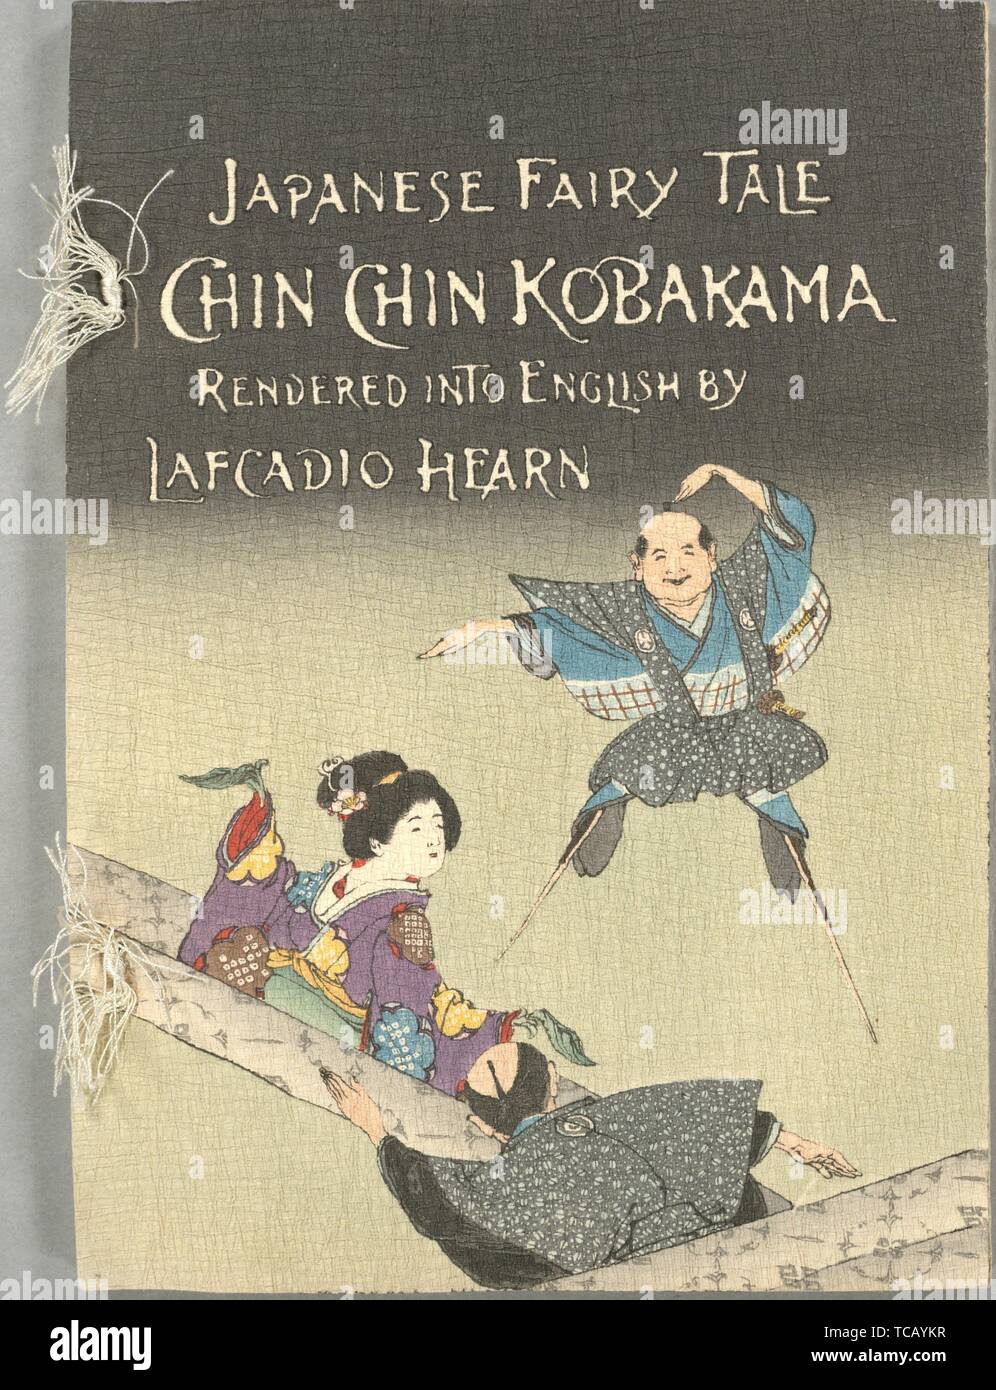 Chin Chin Kobakama Additional title: Chin Chin Kobakama. Hearn, Lafcadio, 1850-1904 (Author). Japanese fairy tales: printed in color by hand from Stock Photo